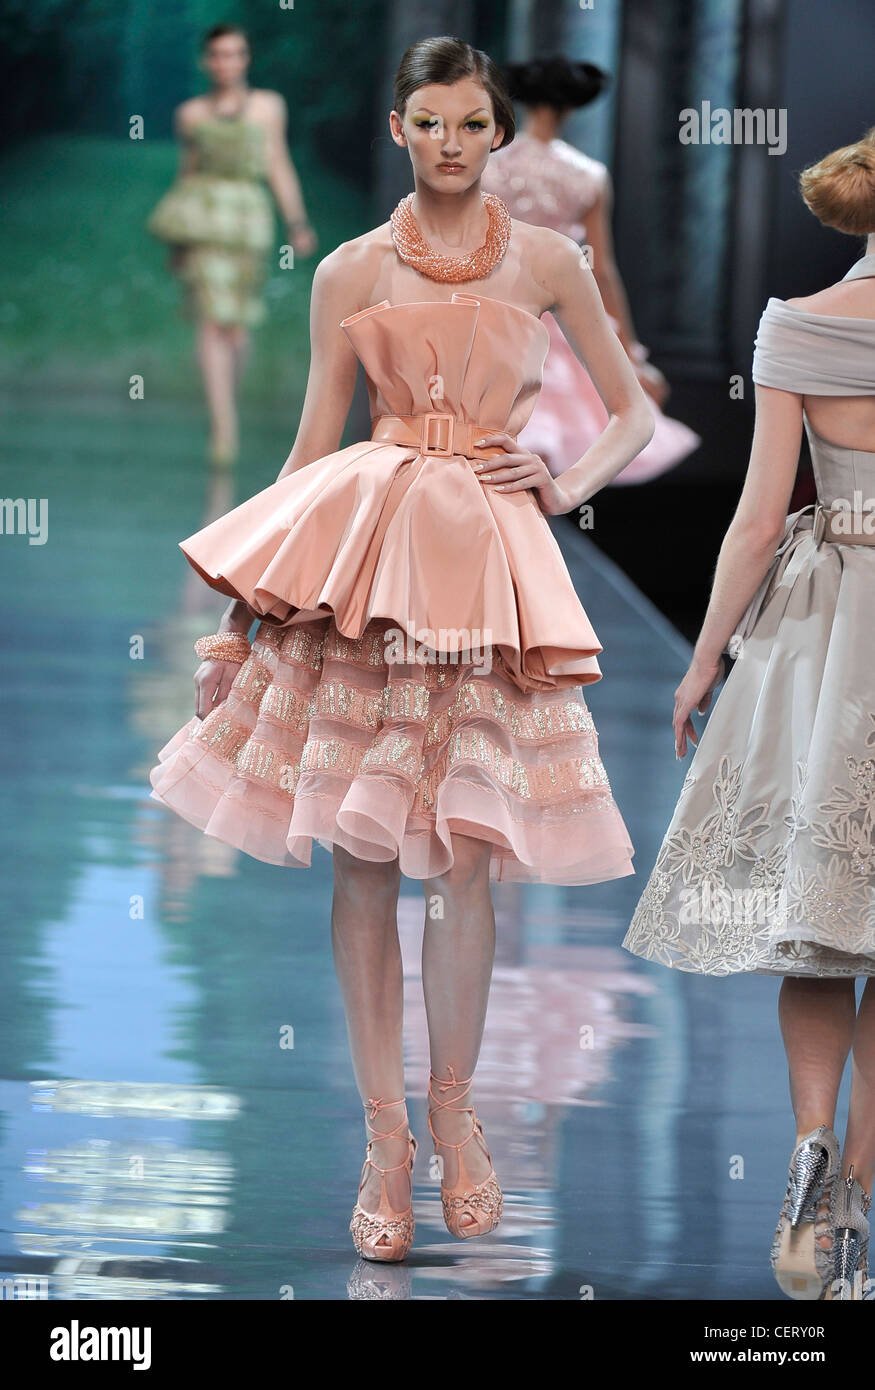 Christian Dior Paris Haute Couture Autumn Winter Model wearing pink  sleeveless dress, gathered skirt and top, belted waist Stock Photo - Alamy